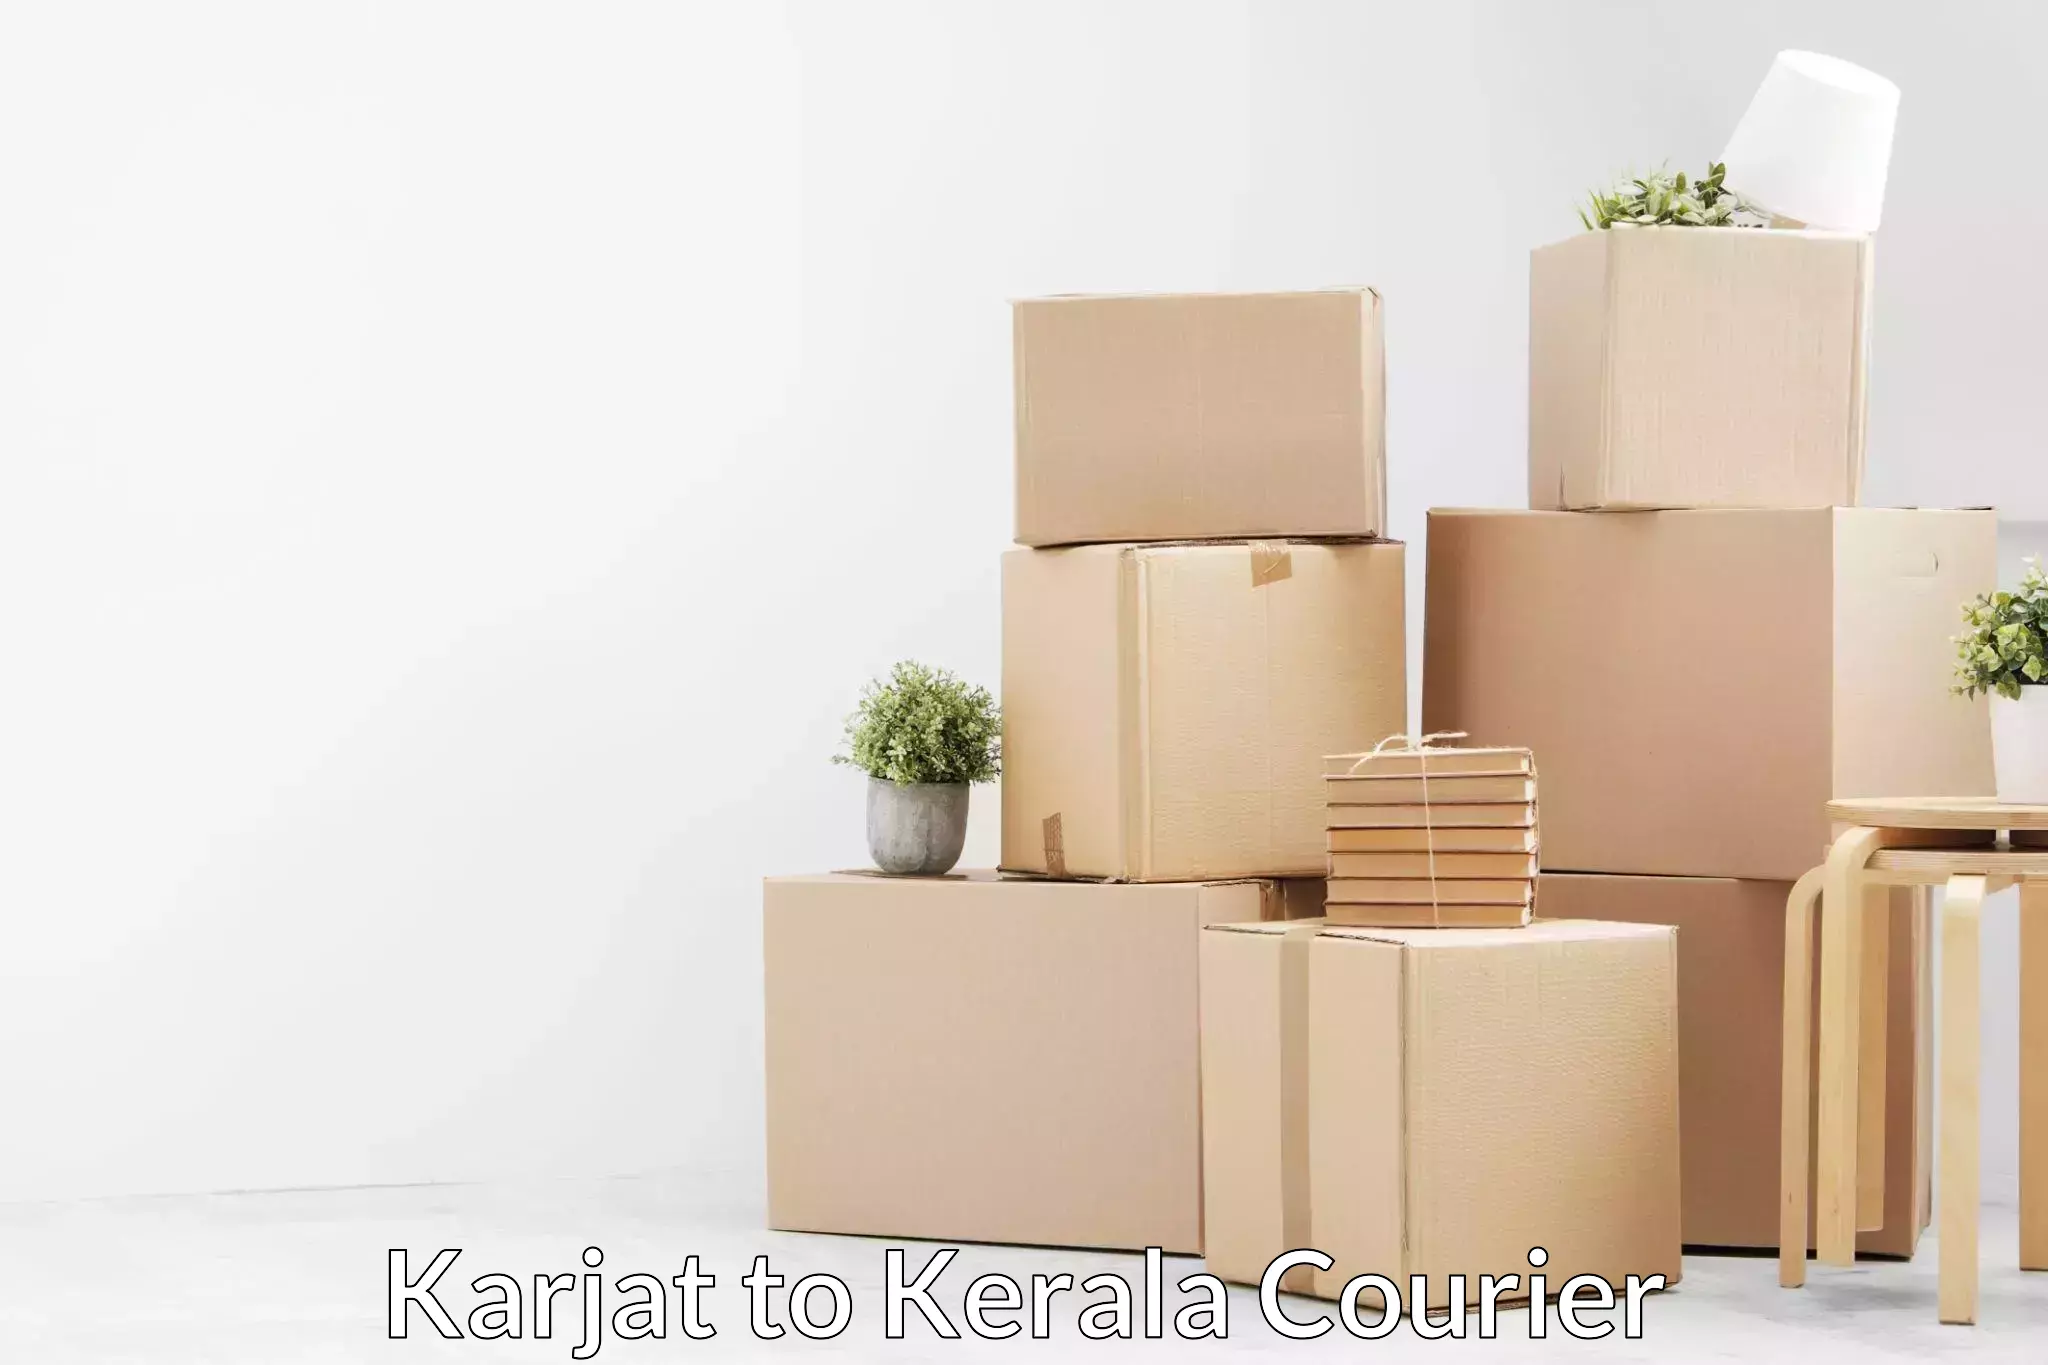 Quality relocation assistance Karjat to Hosdurg